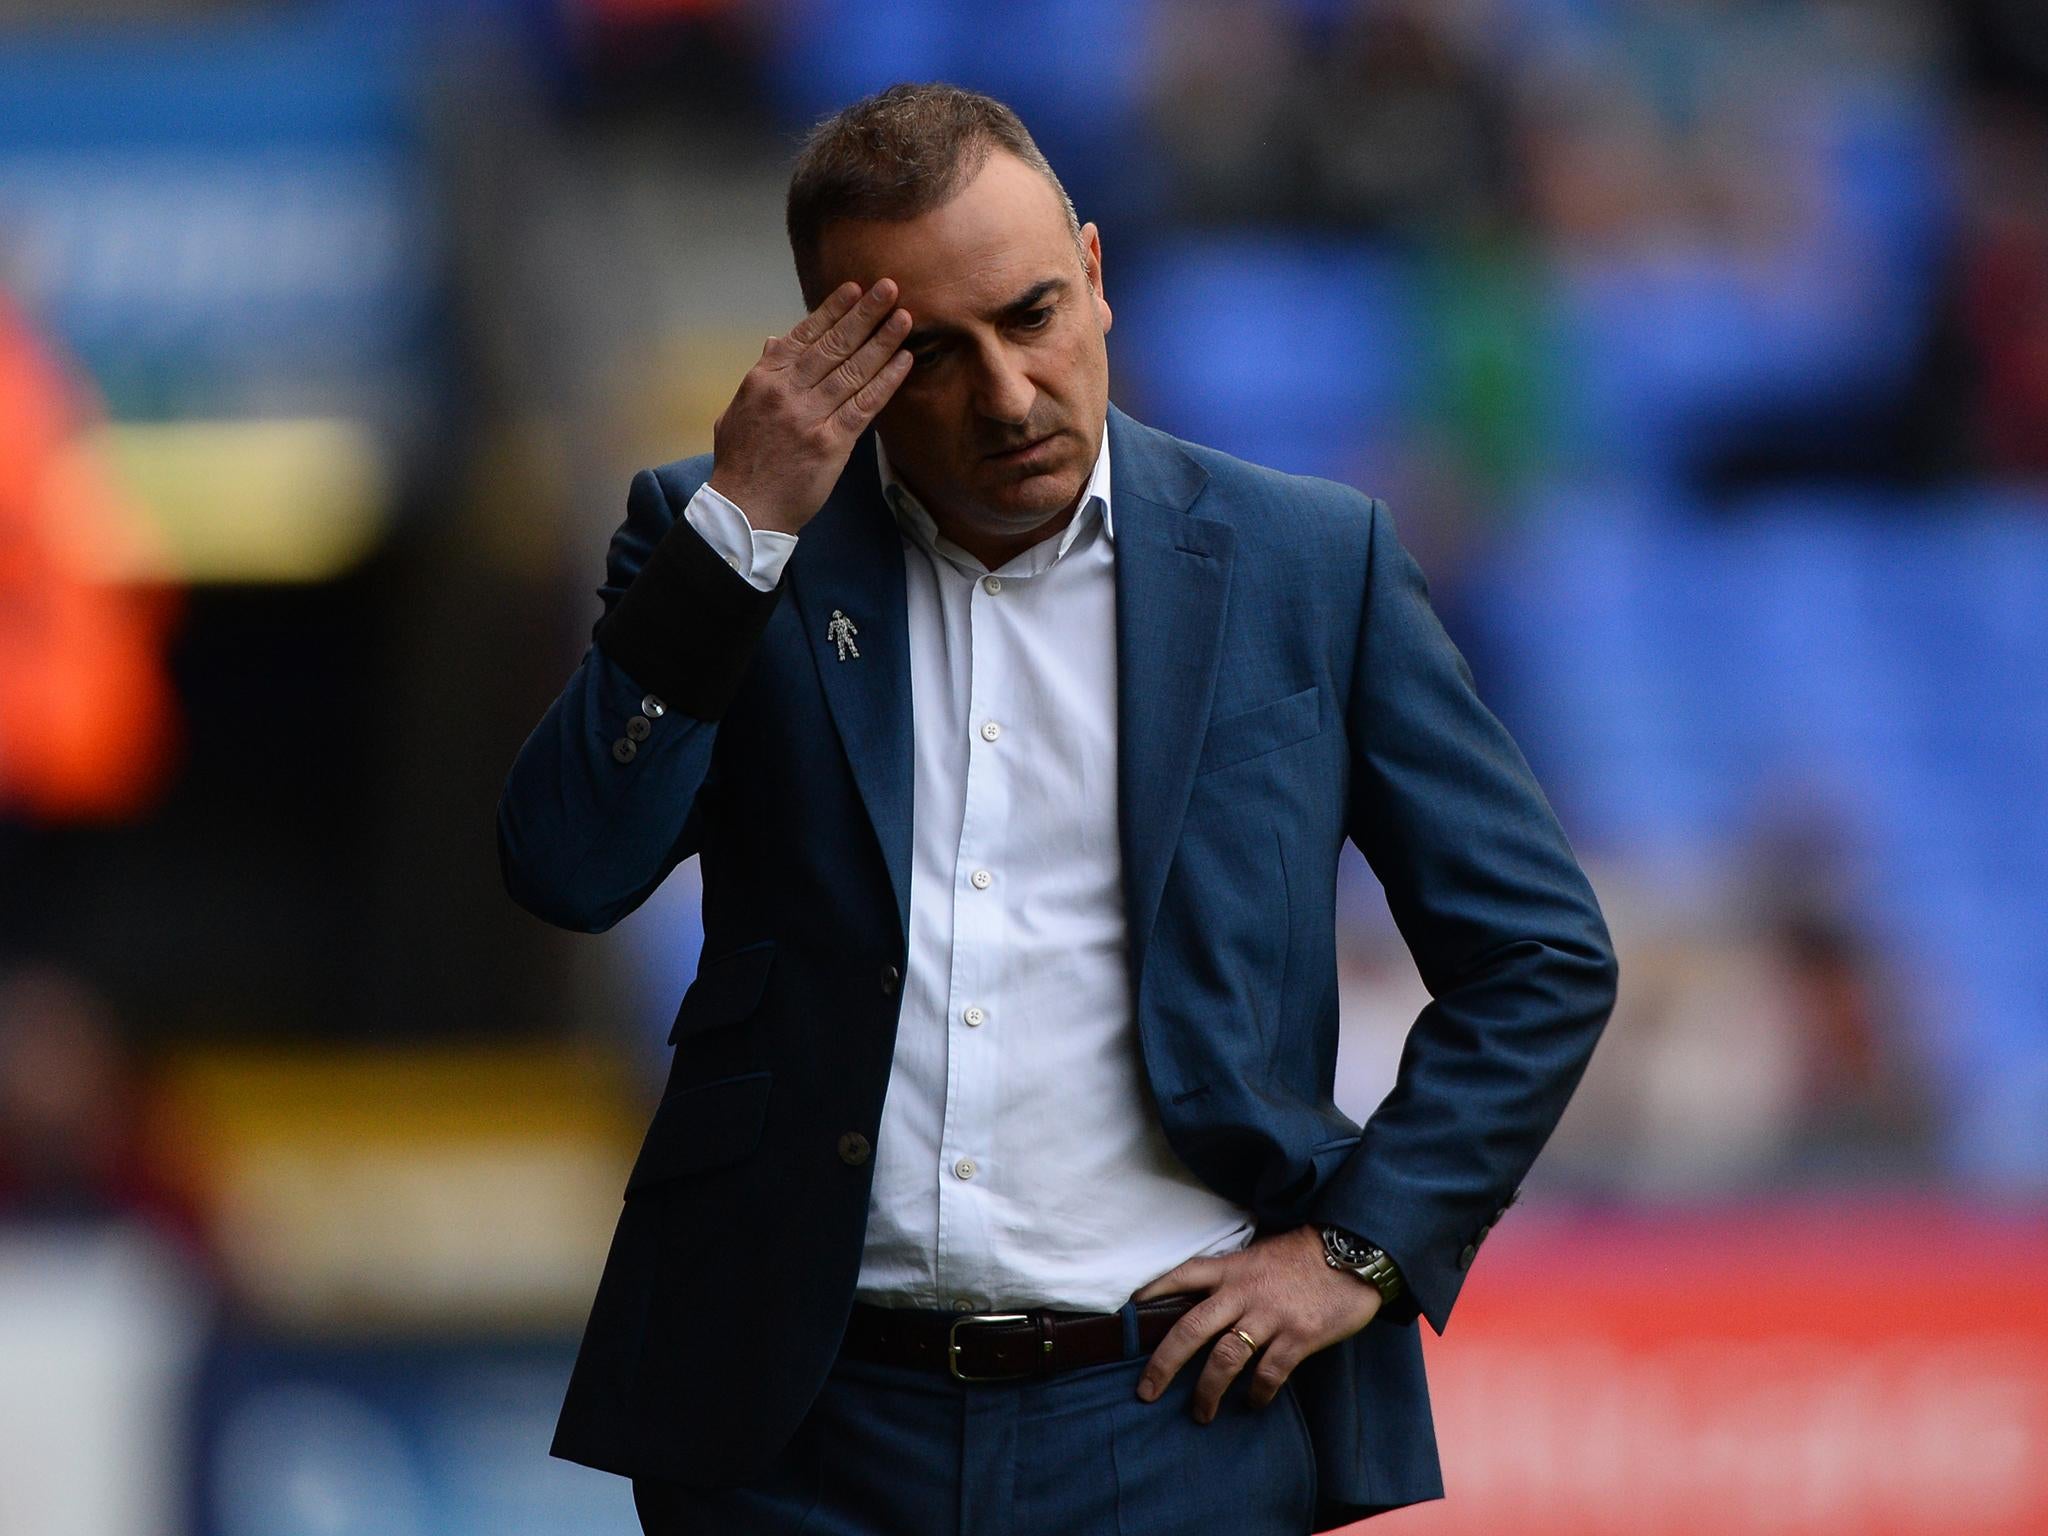 &#13;
Carvalhal was sacked by Sheffield Wednesday on Christmas Eve &#13;